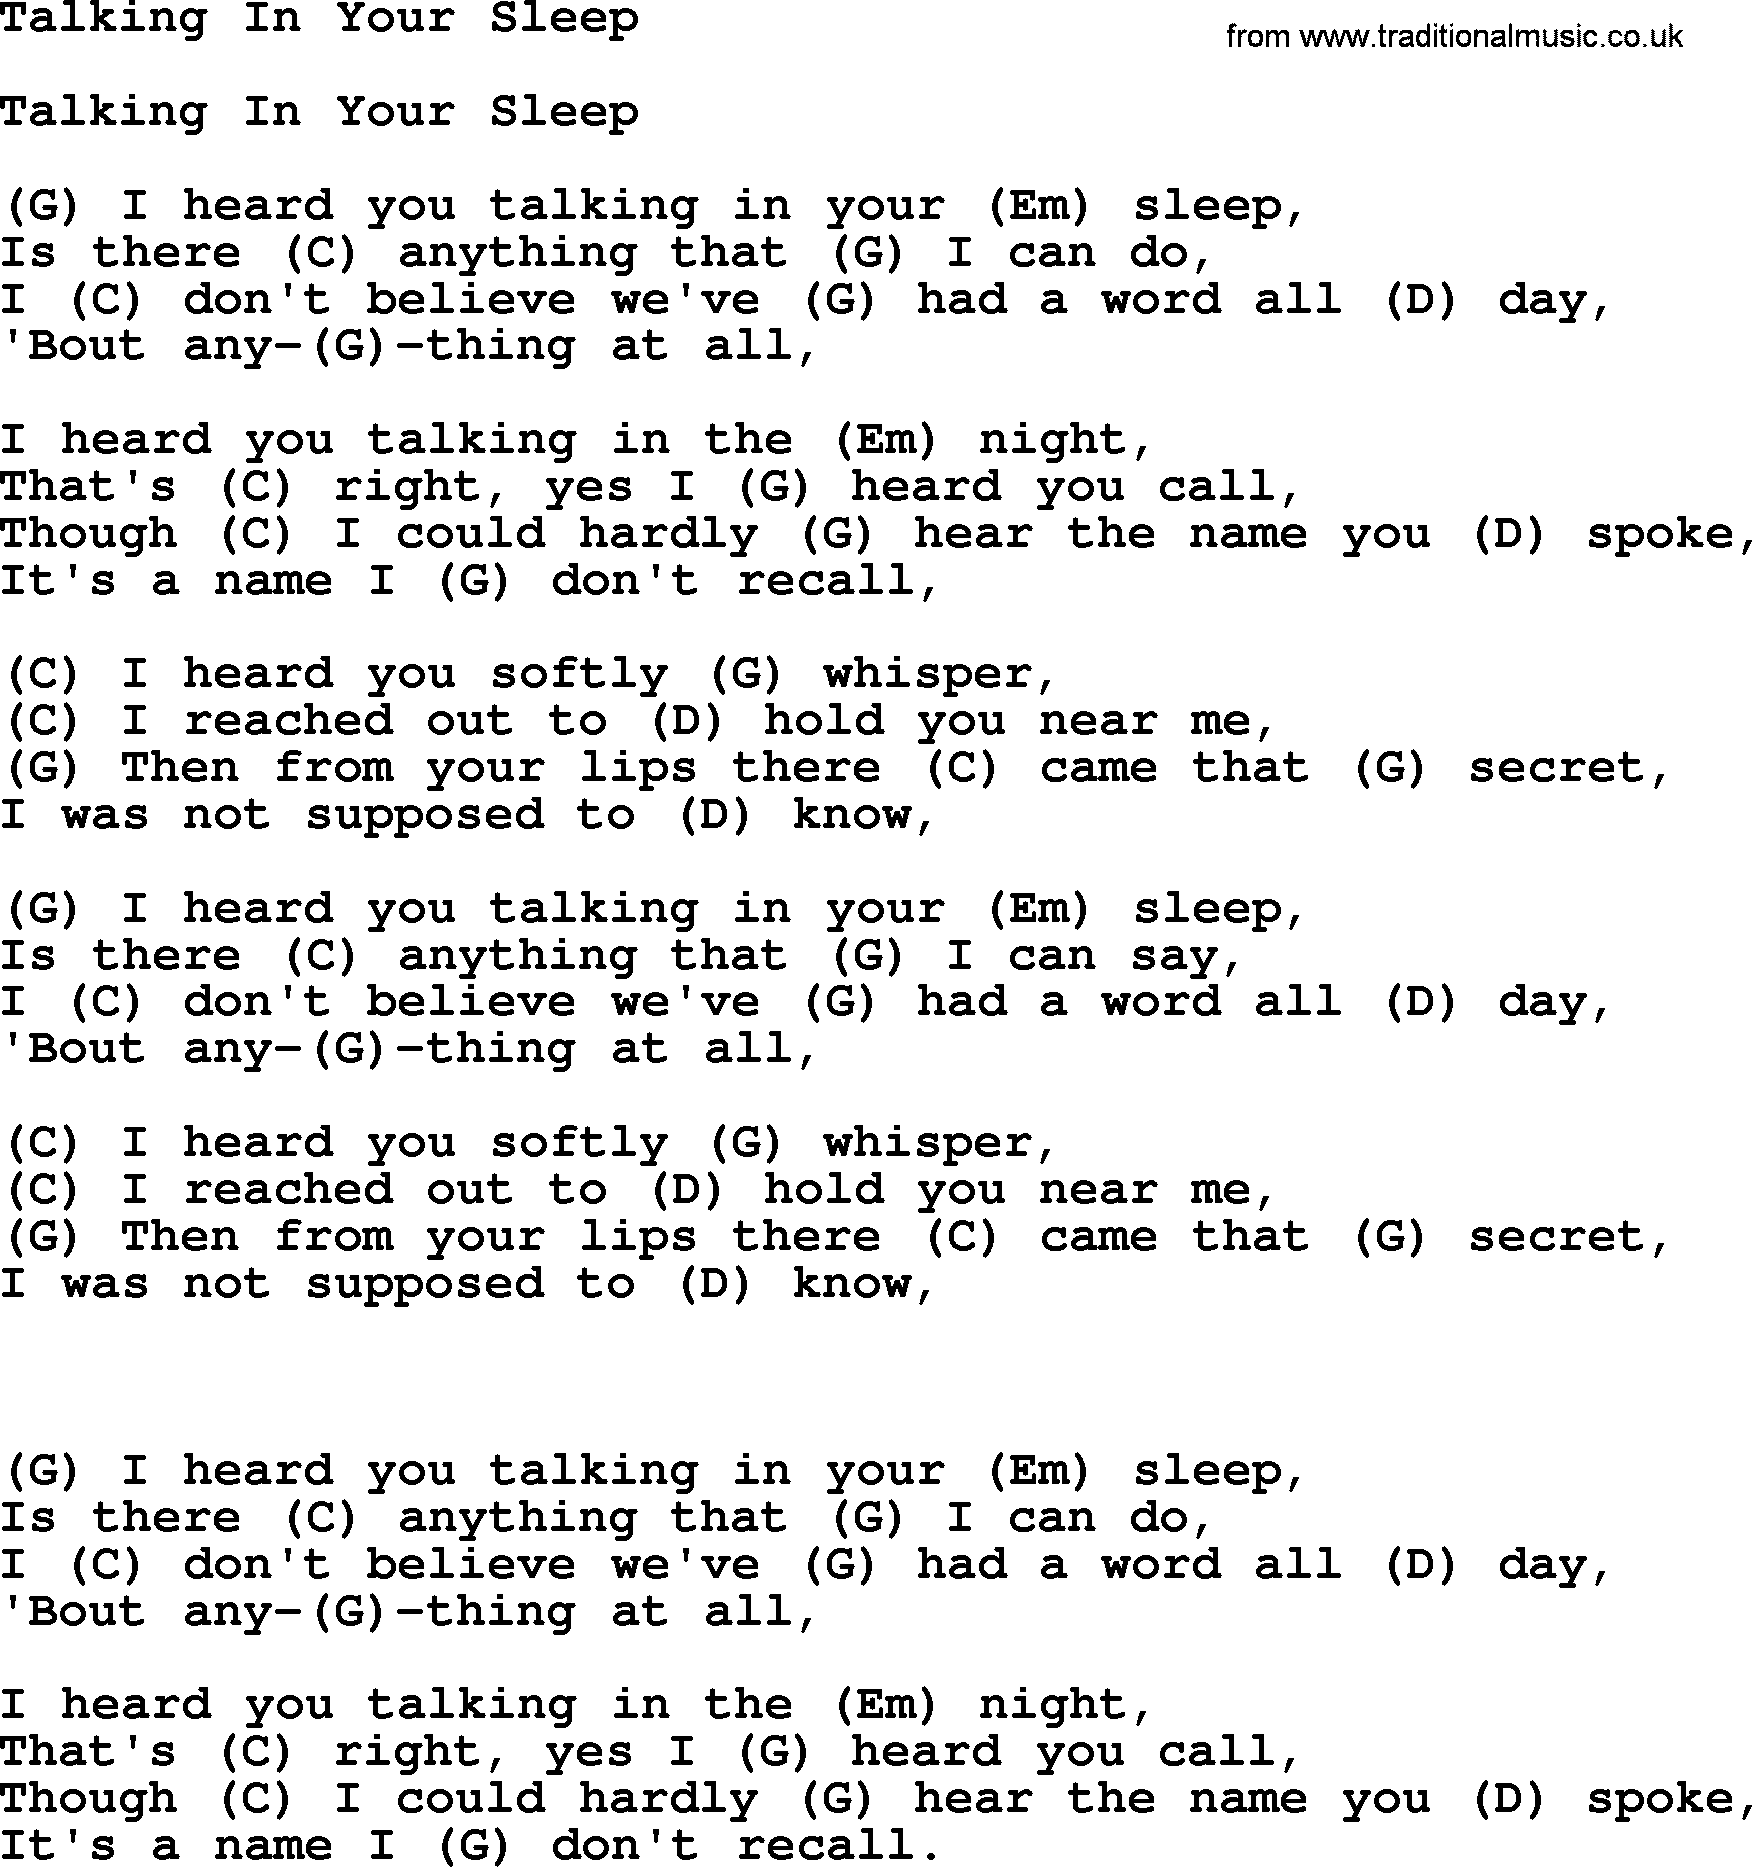 Bluegrass song: Talking In Your Sleep, lyrics and chords